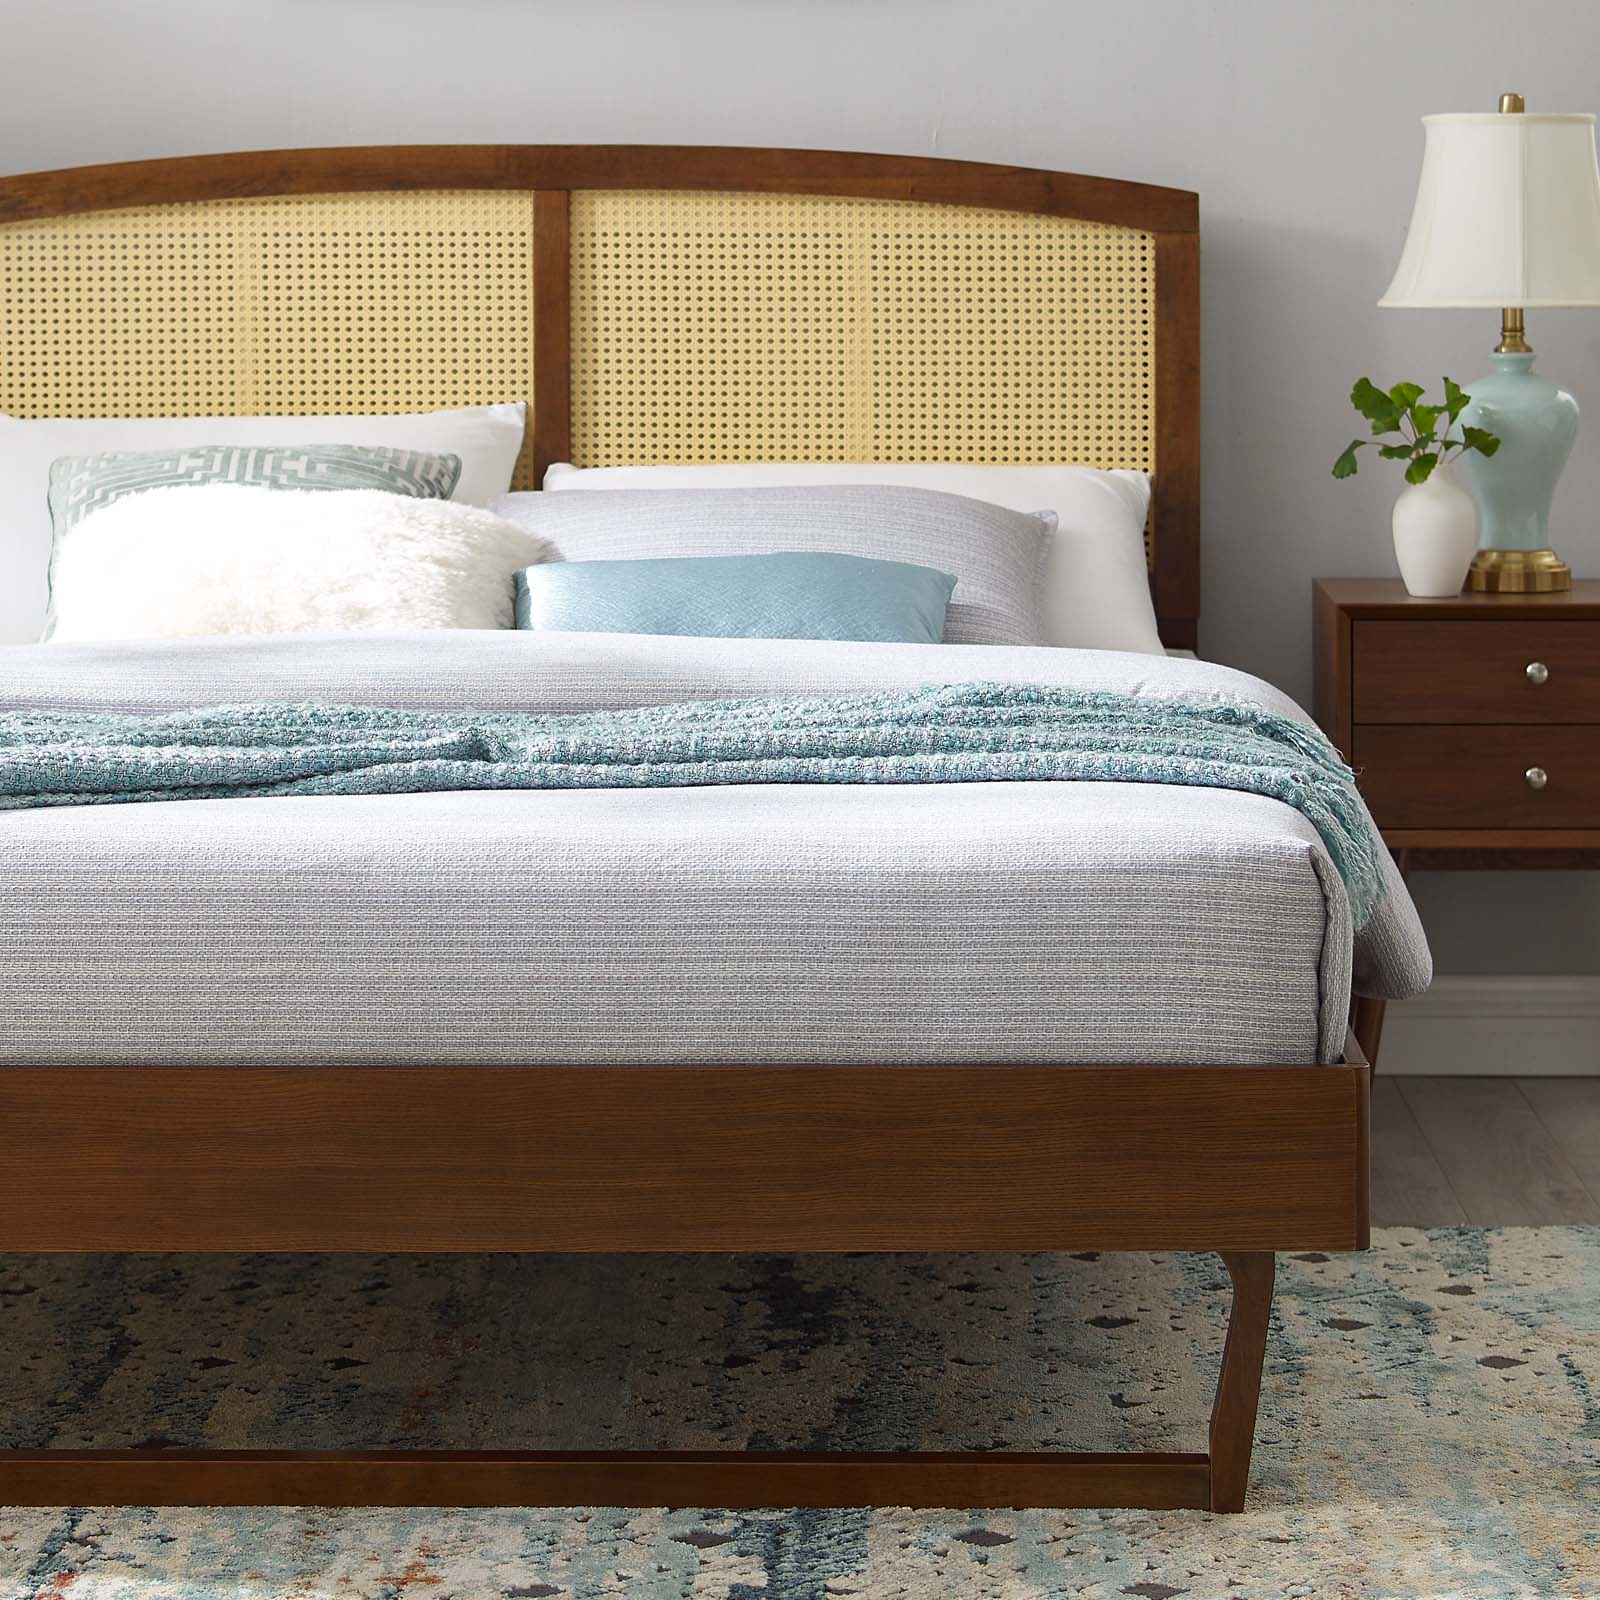 Sierra Cane and Wood Full Platform Bed With Angular Legs - East Shore Modern Home Furnishings